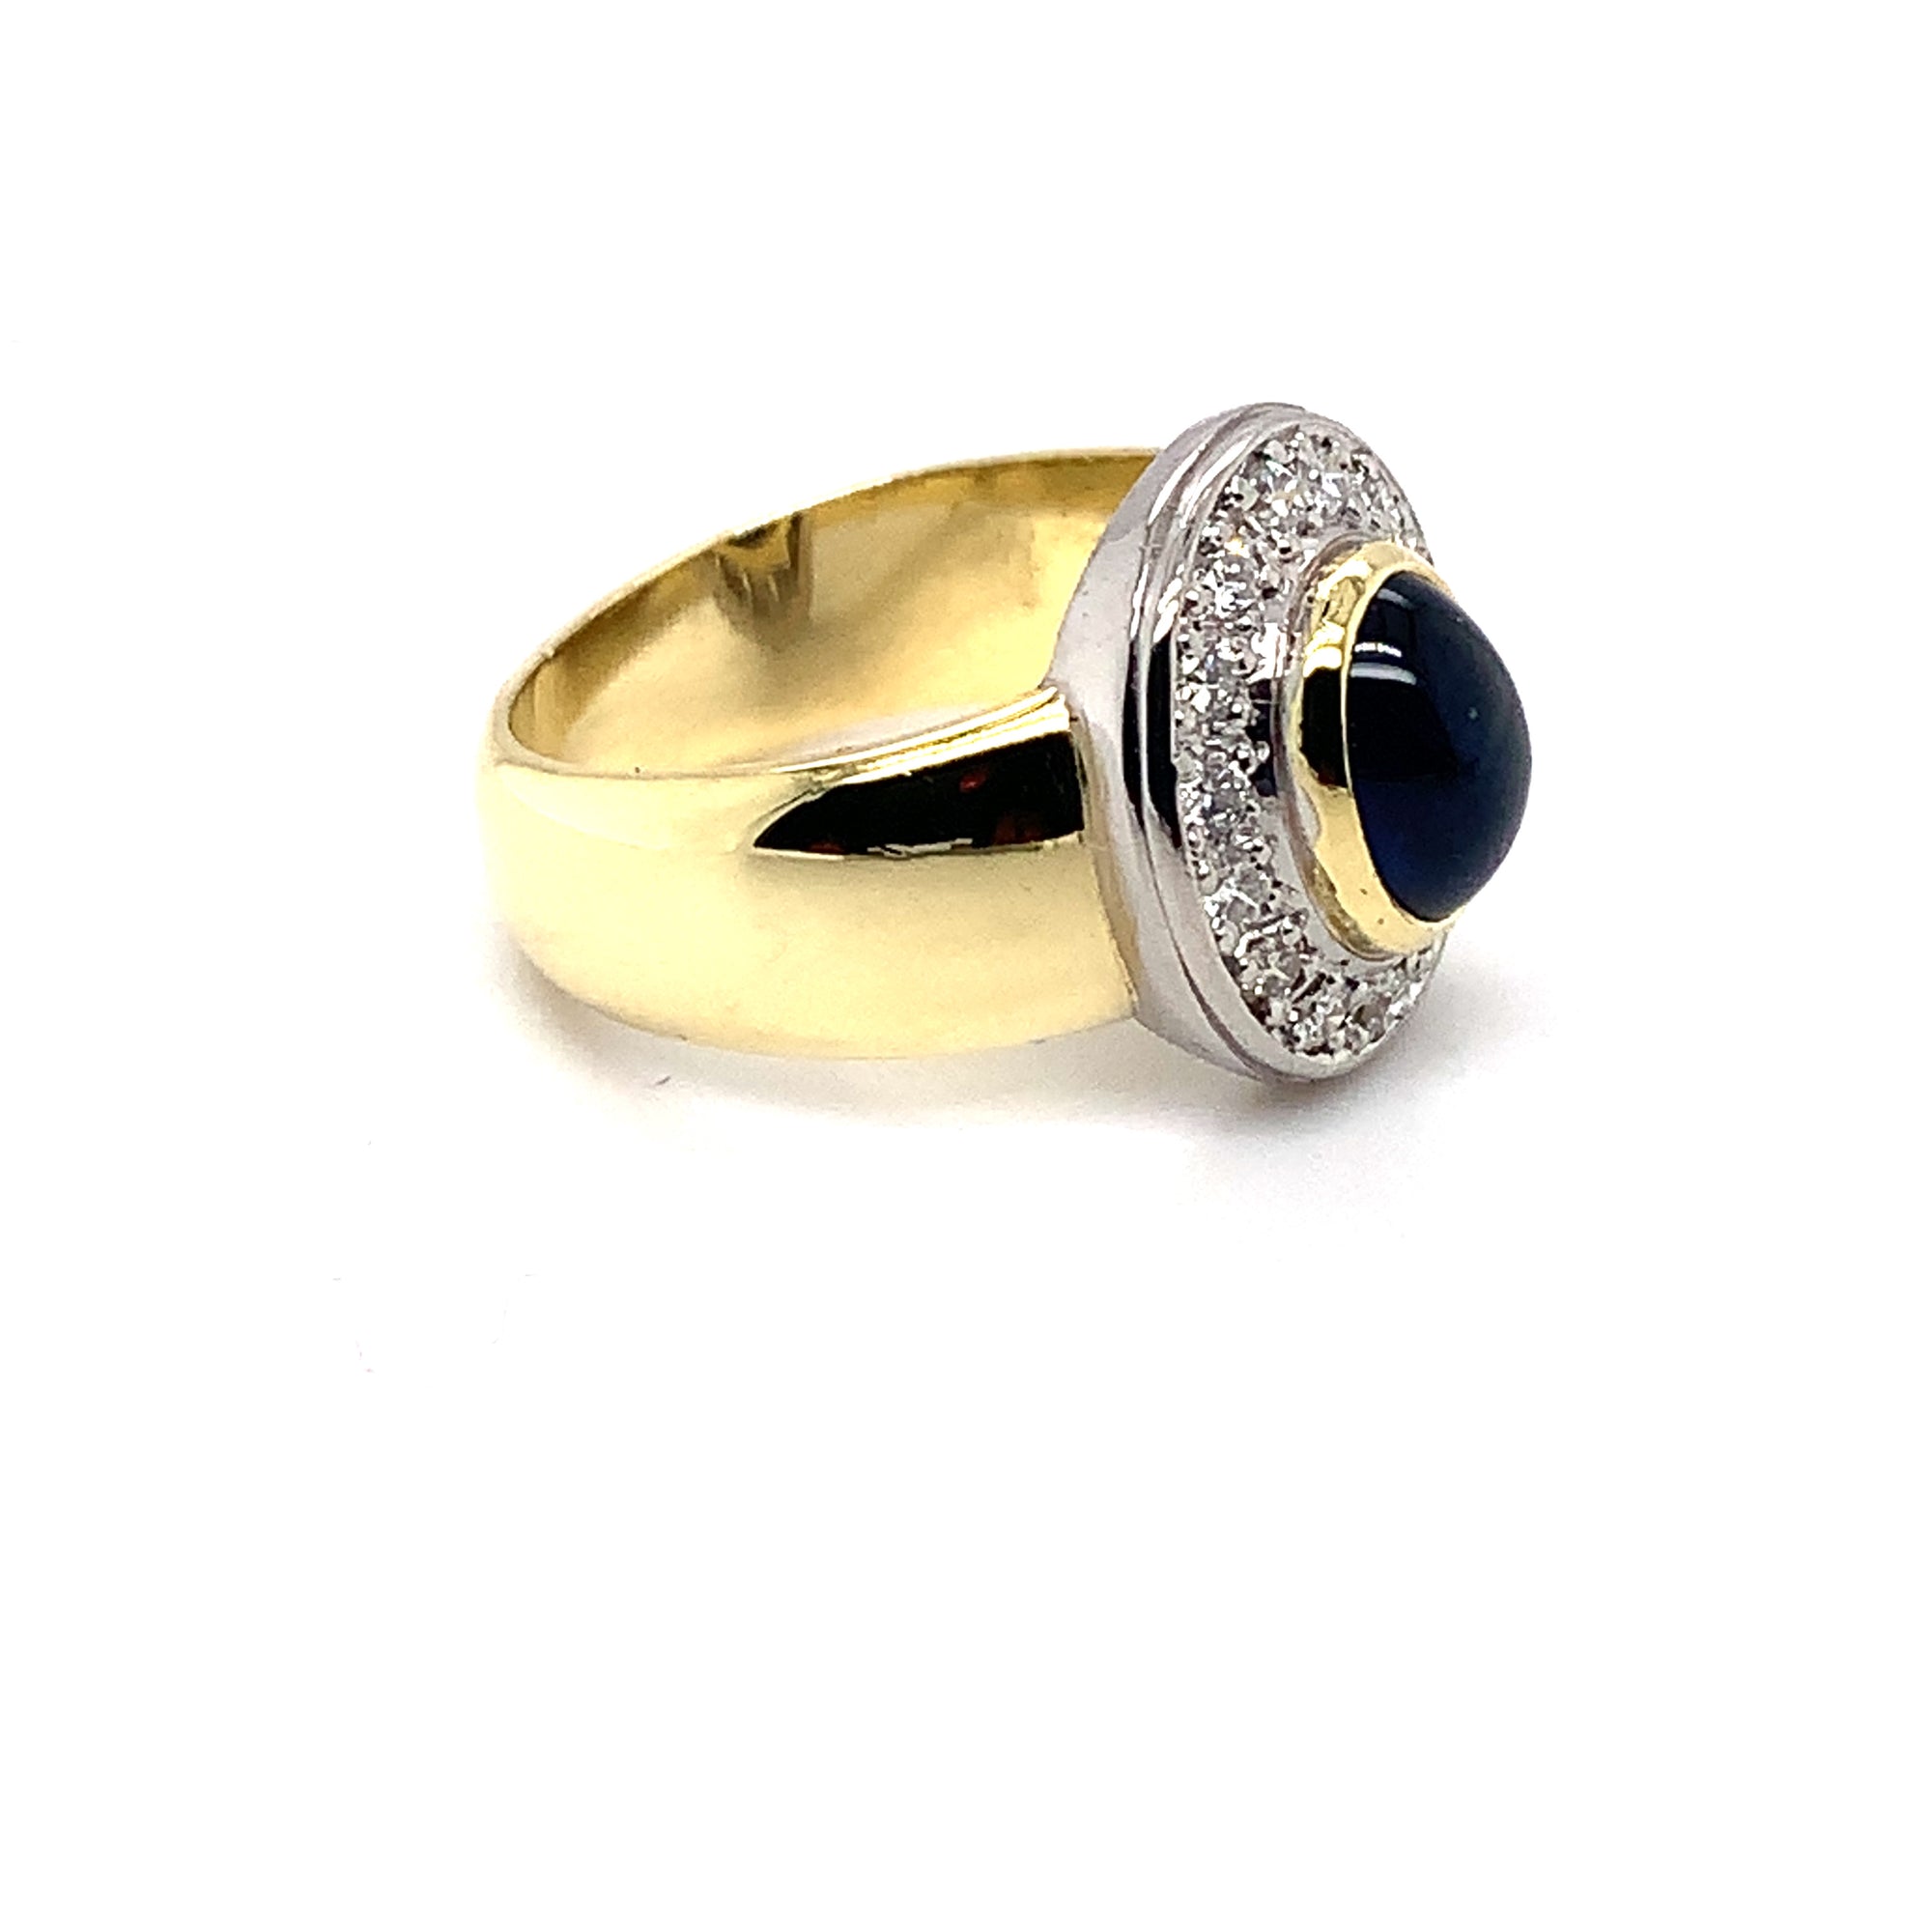 Vintage Oval Blue Cabochon Sapphire and Diamond Halo Ring in 18ct Yellow Gold